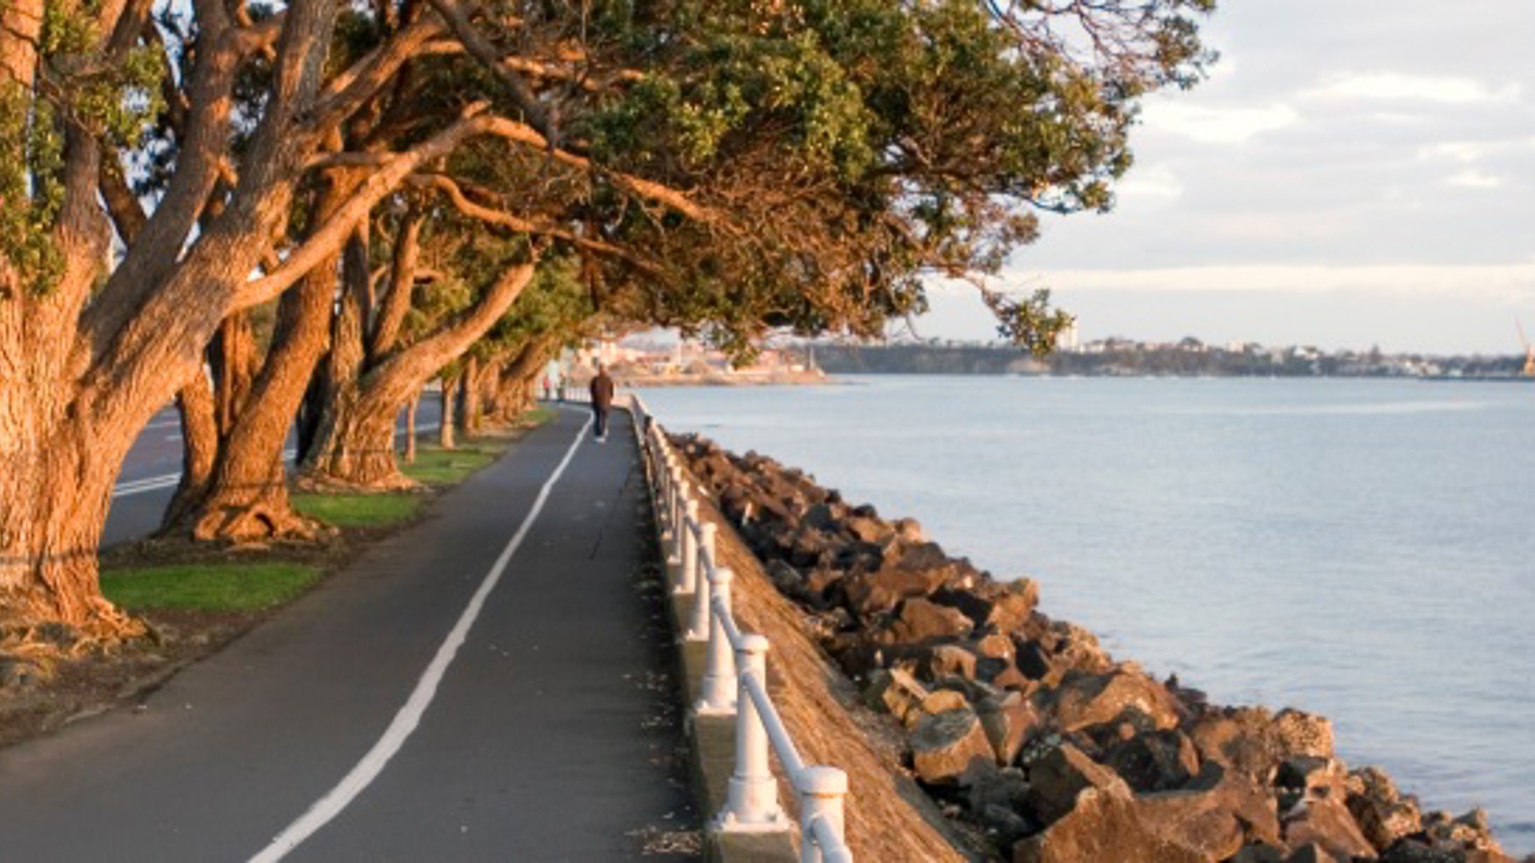 The sun sets on Pohutukawa trees along Tāmaki Drive. To the right of the flat asphalt path there is a barrier to the rocks and water.